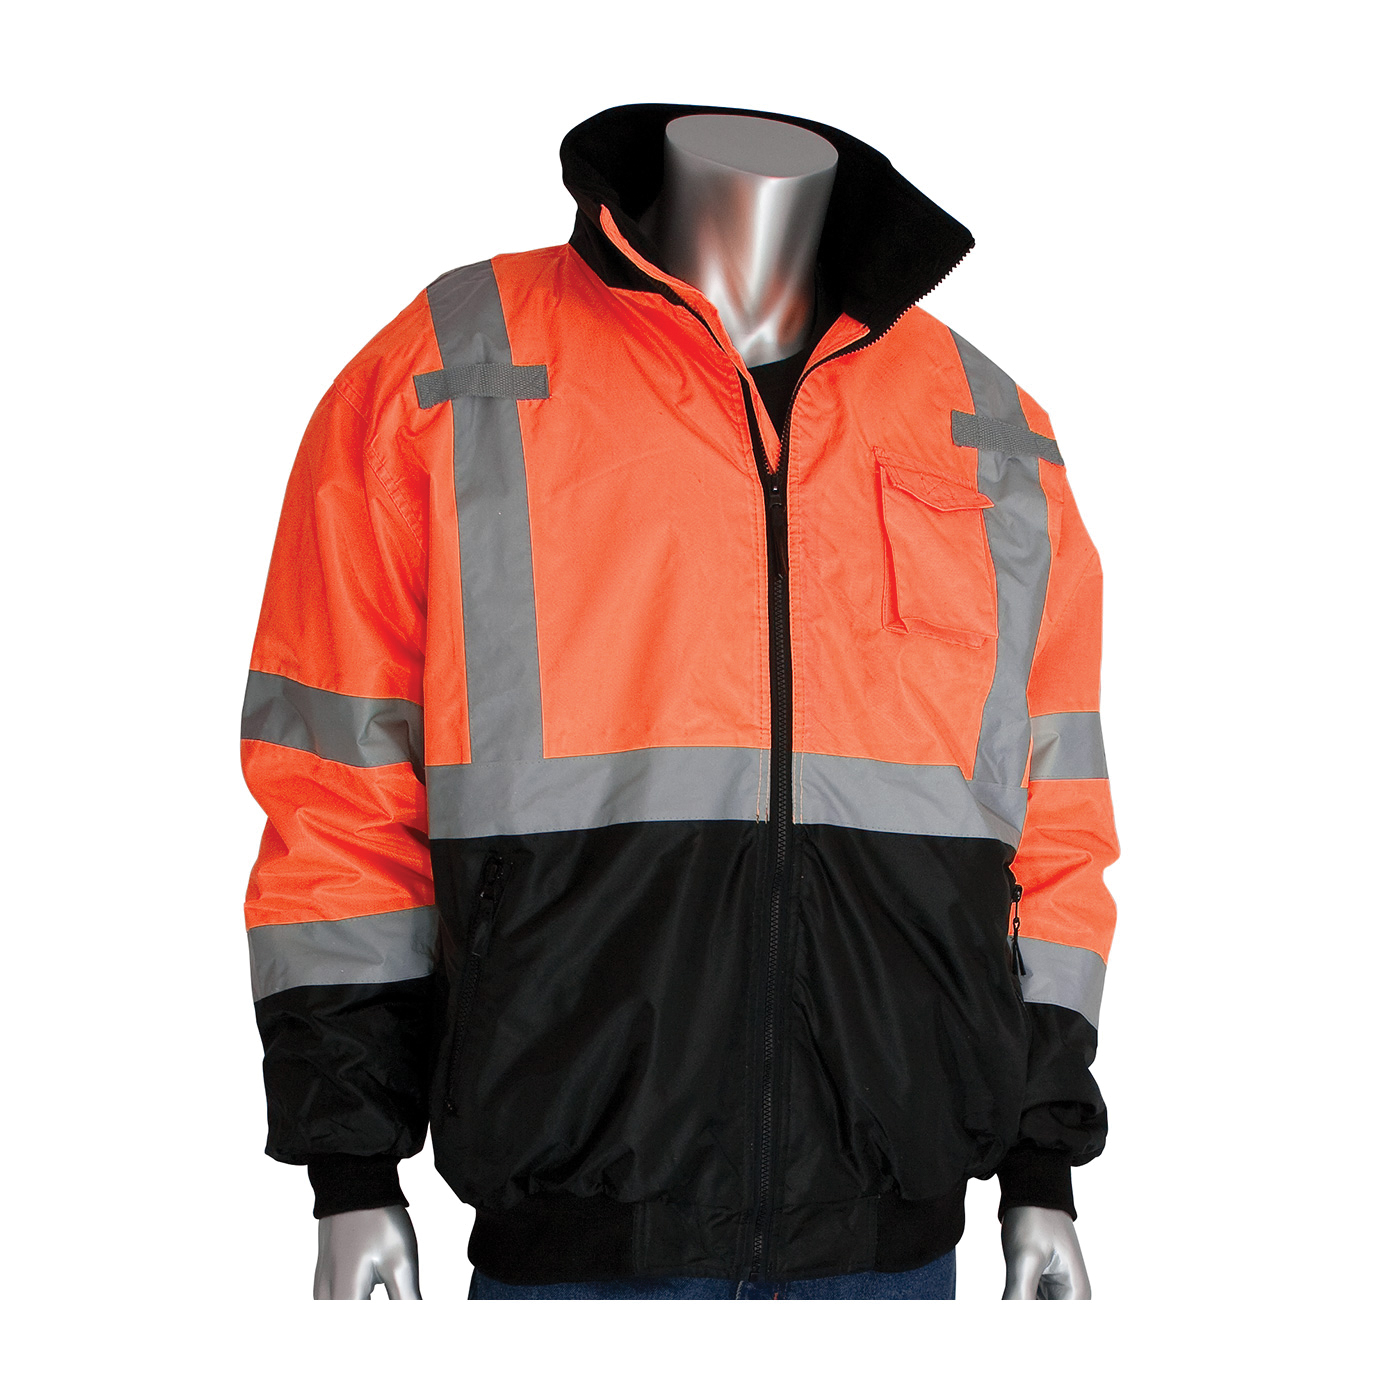 PIP® 333-1766-OR/6X Bomber Jacket With Zip-Out Fleece Liner, Hi-Viz Orange, Polyester, 78 in Chest, Resists: Water, Specifications Met: ANSI 107 Class 3 Type R